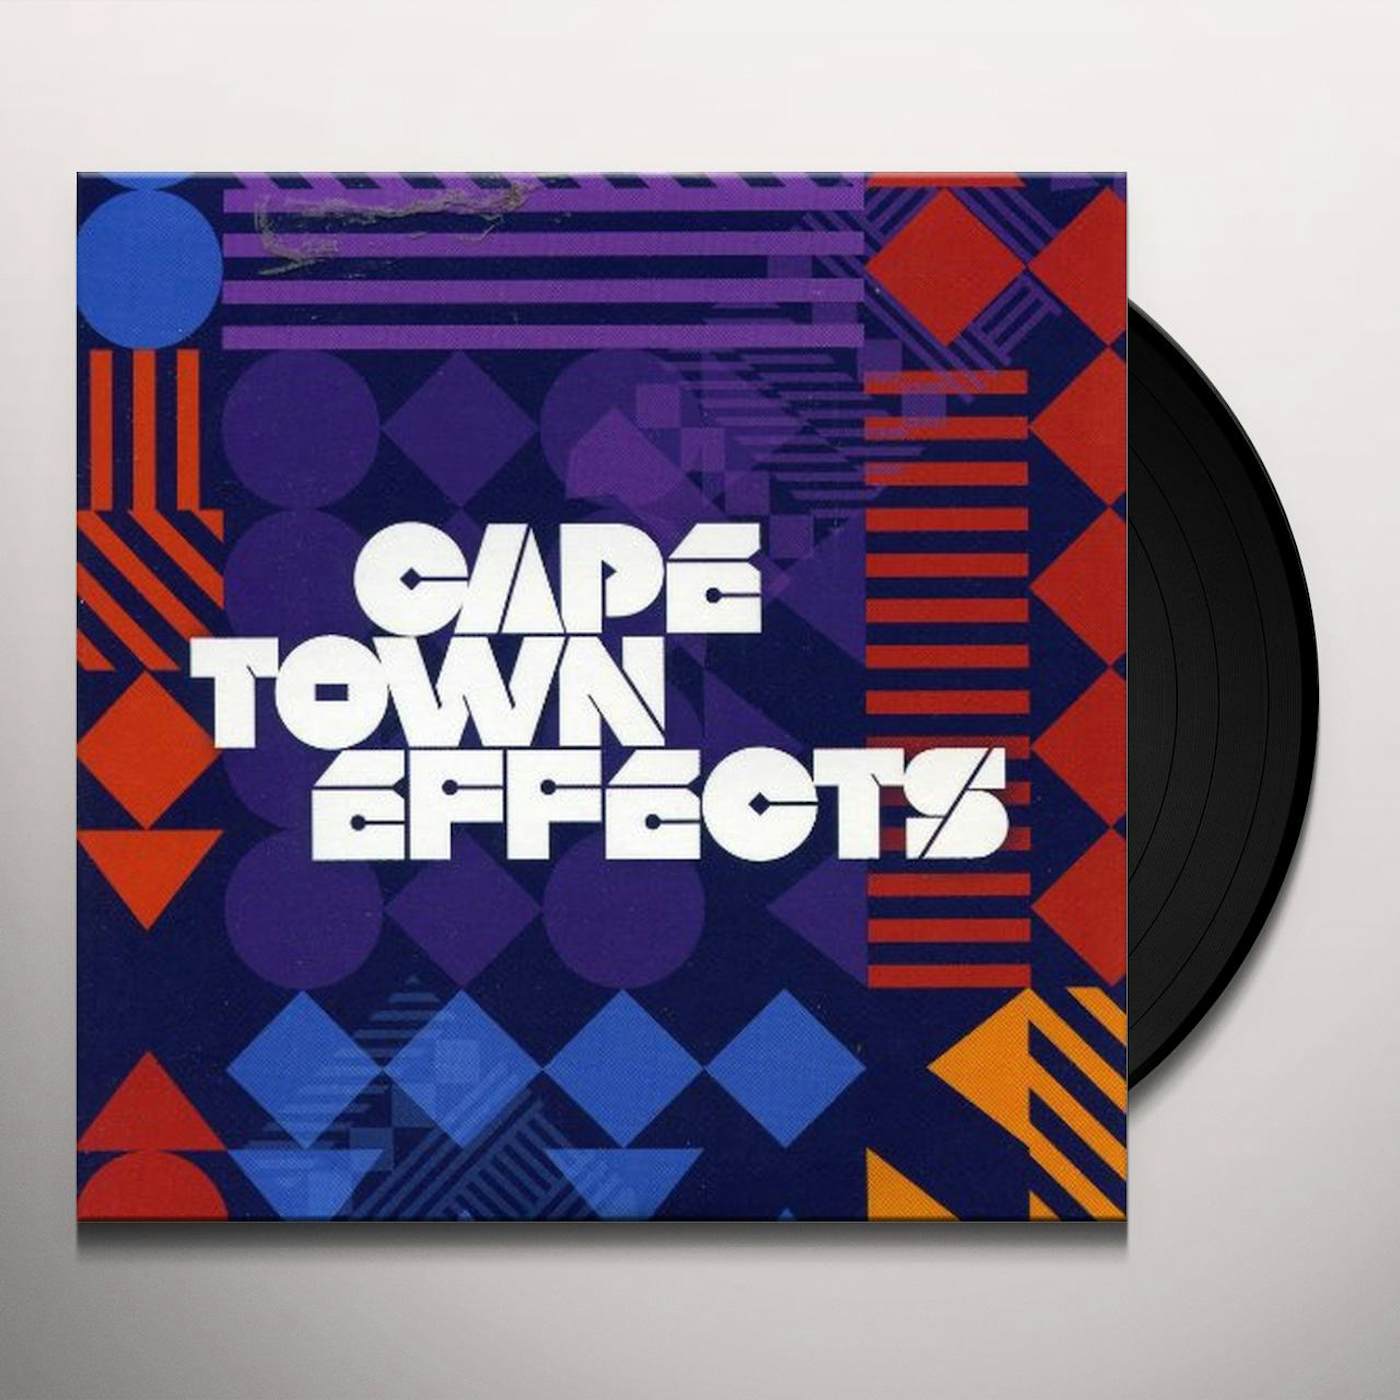 Cape Town Effects Vinyl Record